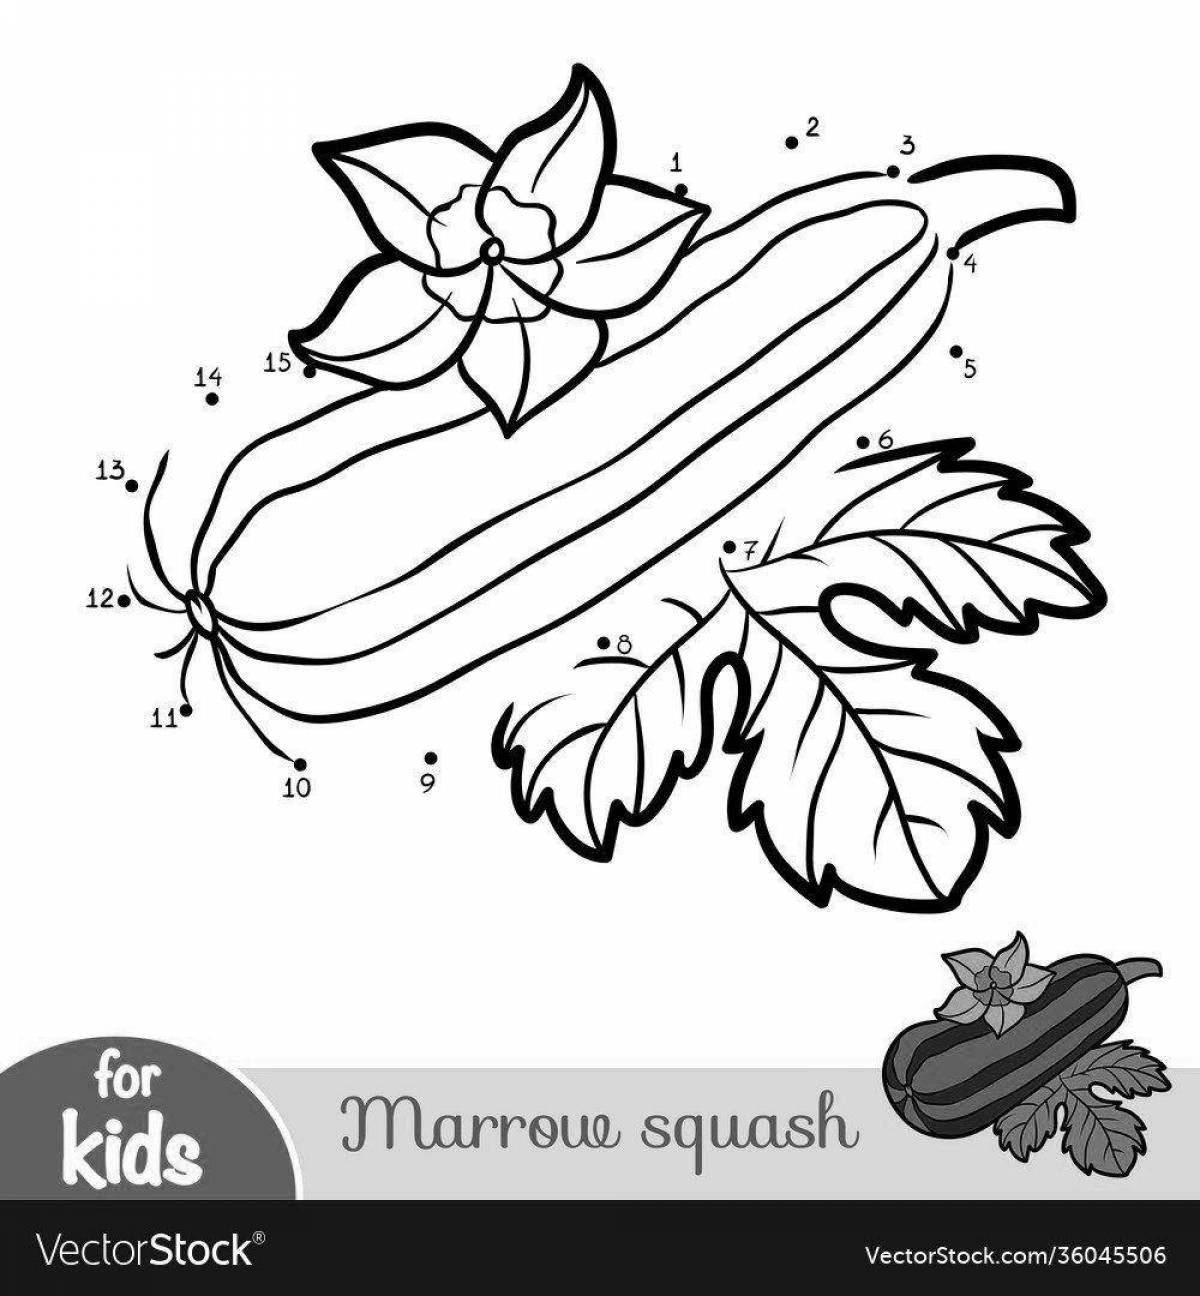 Interesting zucchini coloring page